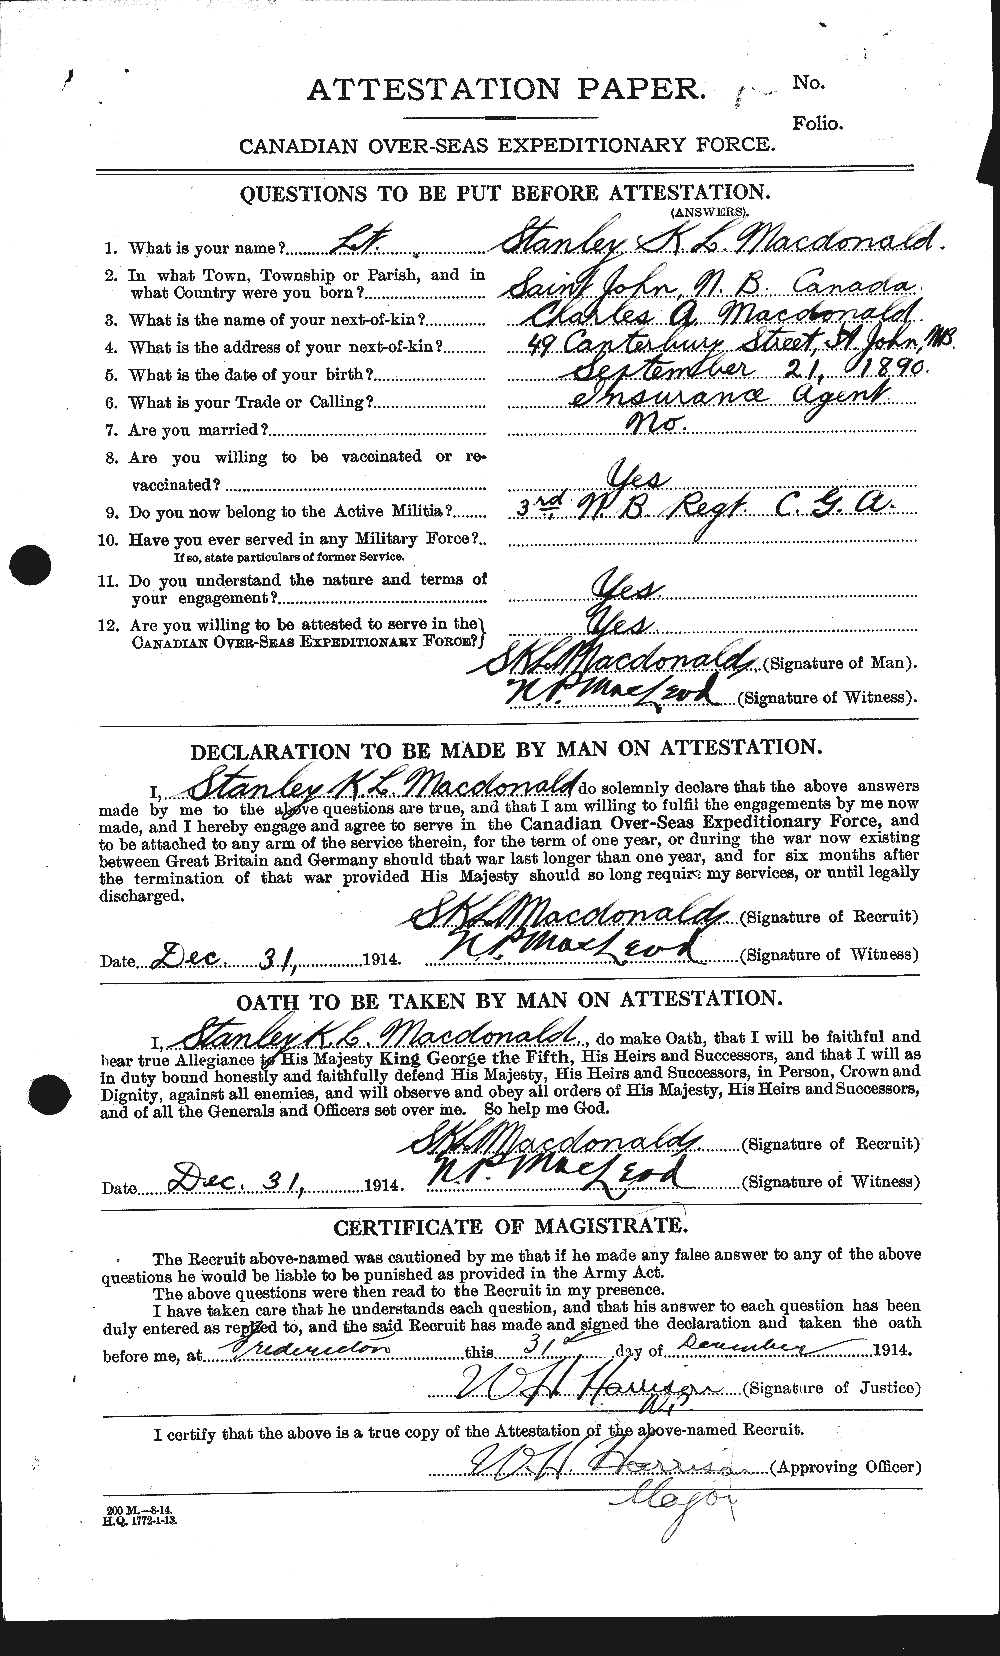 Personnel Records of the First World War - CEF 515911a